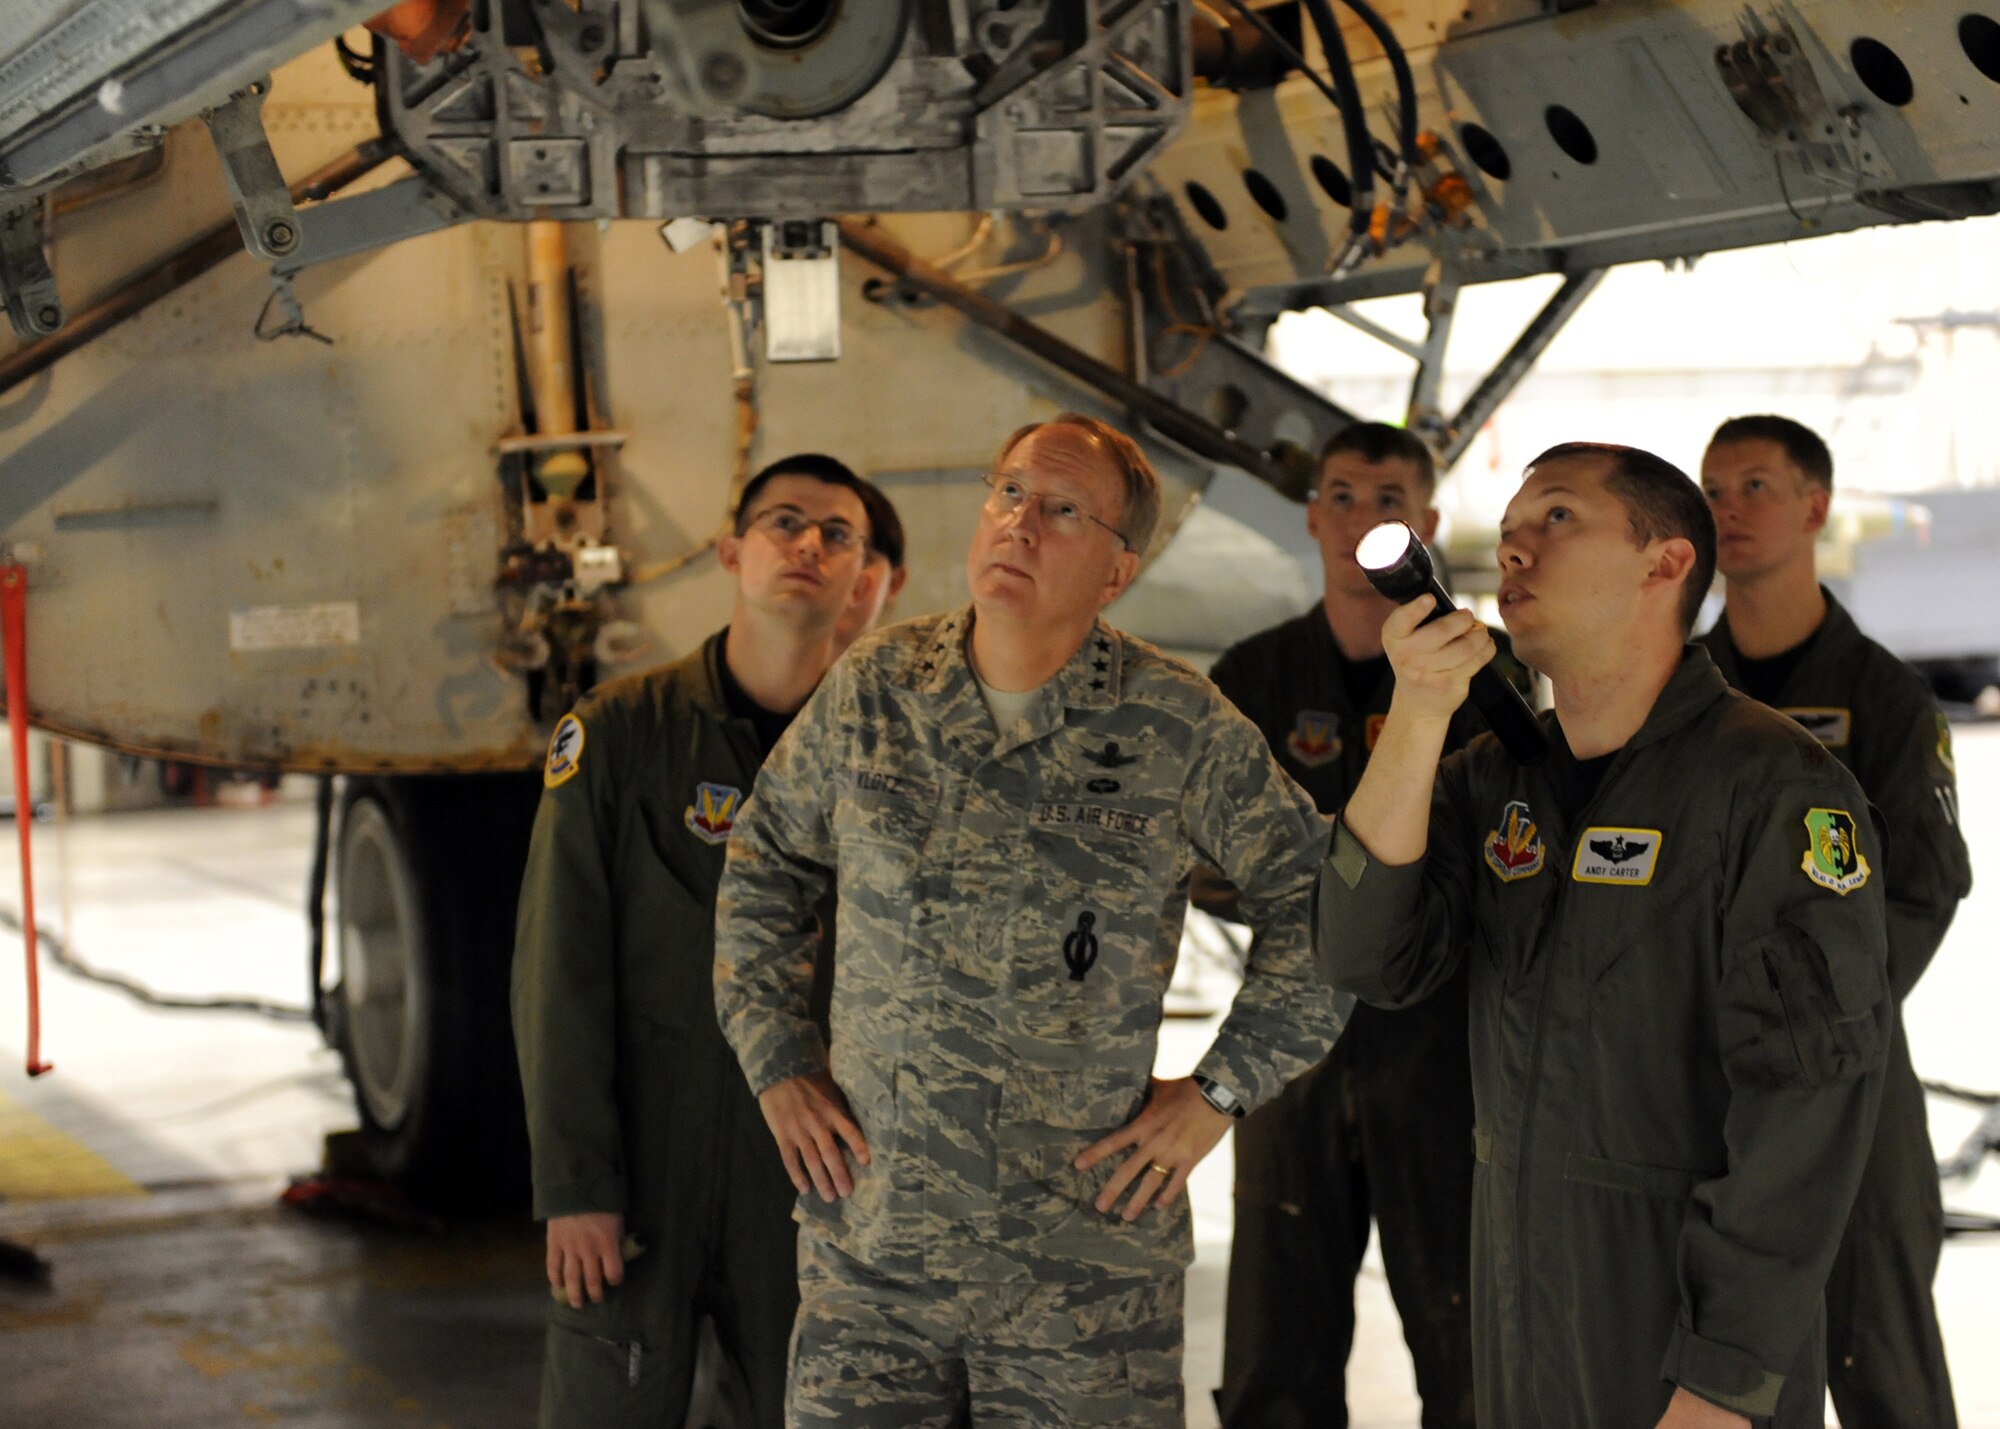 MINOT AIR FORCE BASE, N.D. -- Lt. Gen. Frank G. Klotz, Global Strike Command commander, discusses the capabilities of a B-52H Stratofortress with Capt. Matt Guasco, 23rd Bomb Squadron aircraft commander, while others look on here, Oct. 28. The general is here to meet members of Minot AFB and the local community. He is scheduled to be the featured speaker at the Minot Chamber of Commerce annual meeting and luncheon in Minot Oct. 29. (U.S. Air Force photo by Staff Sgt. Keith Ballard)